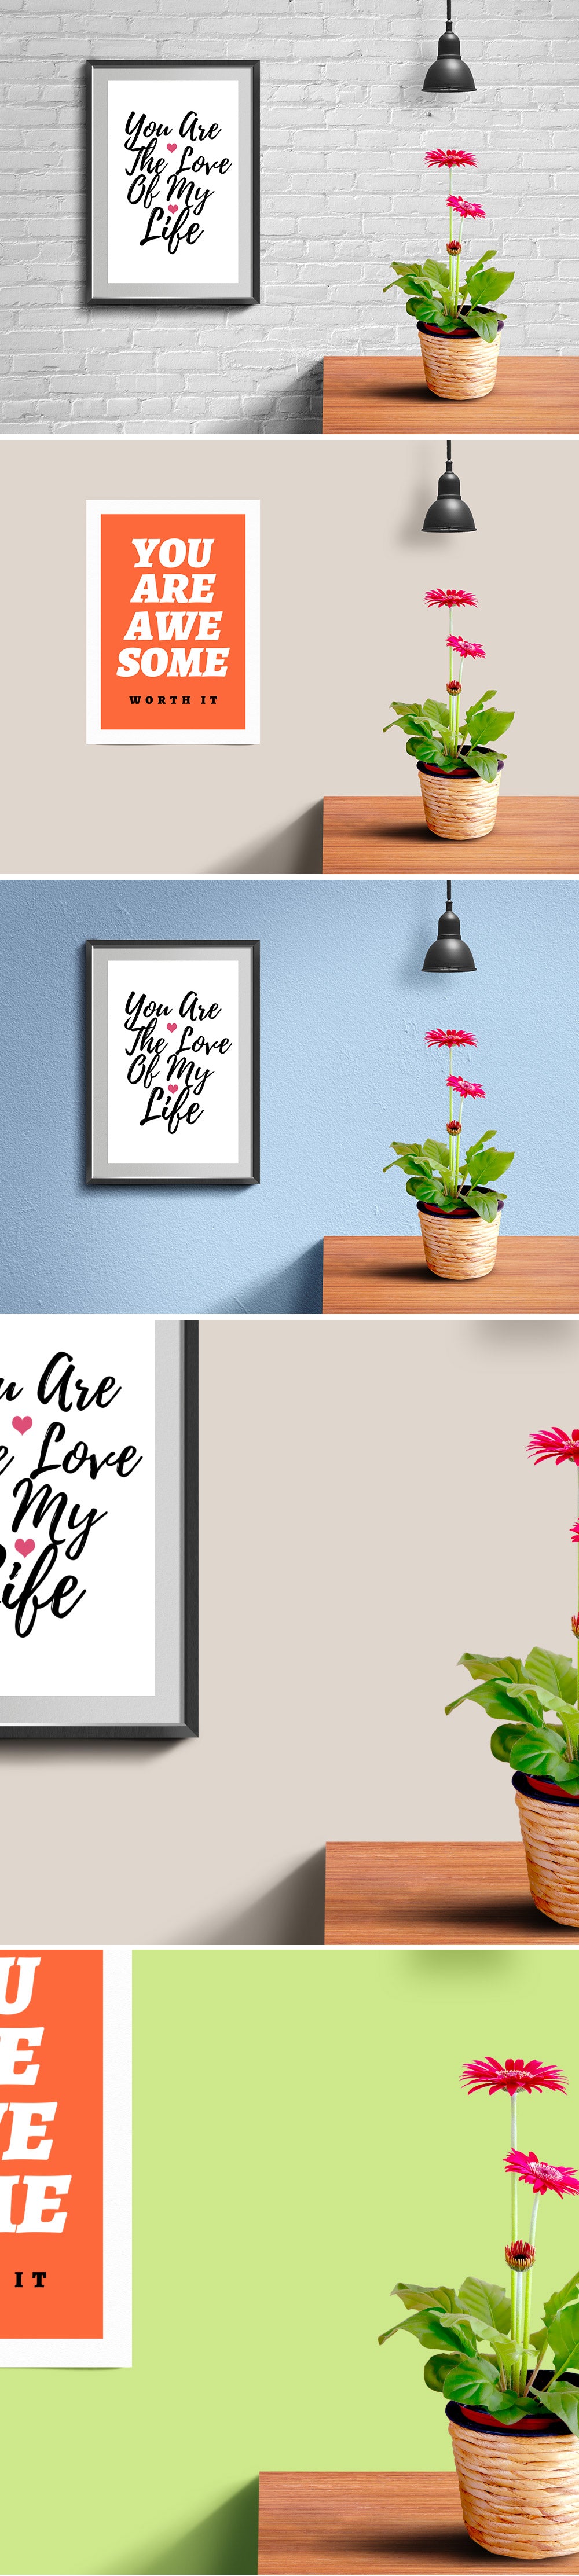 Free Wall Frame And Poster Mockup PSD